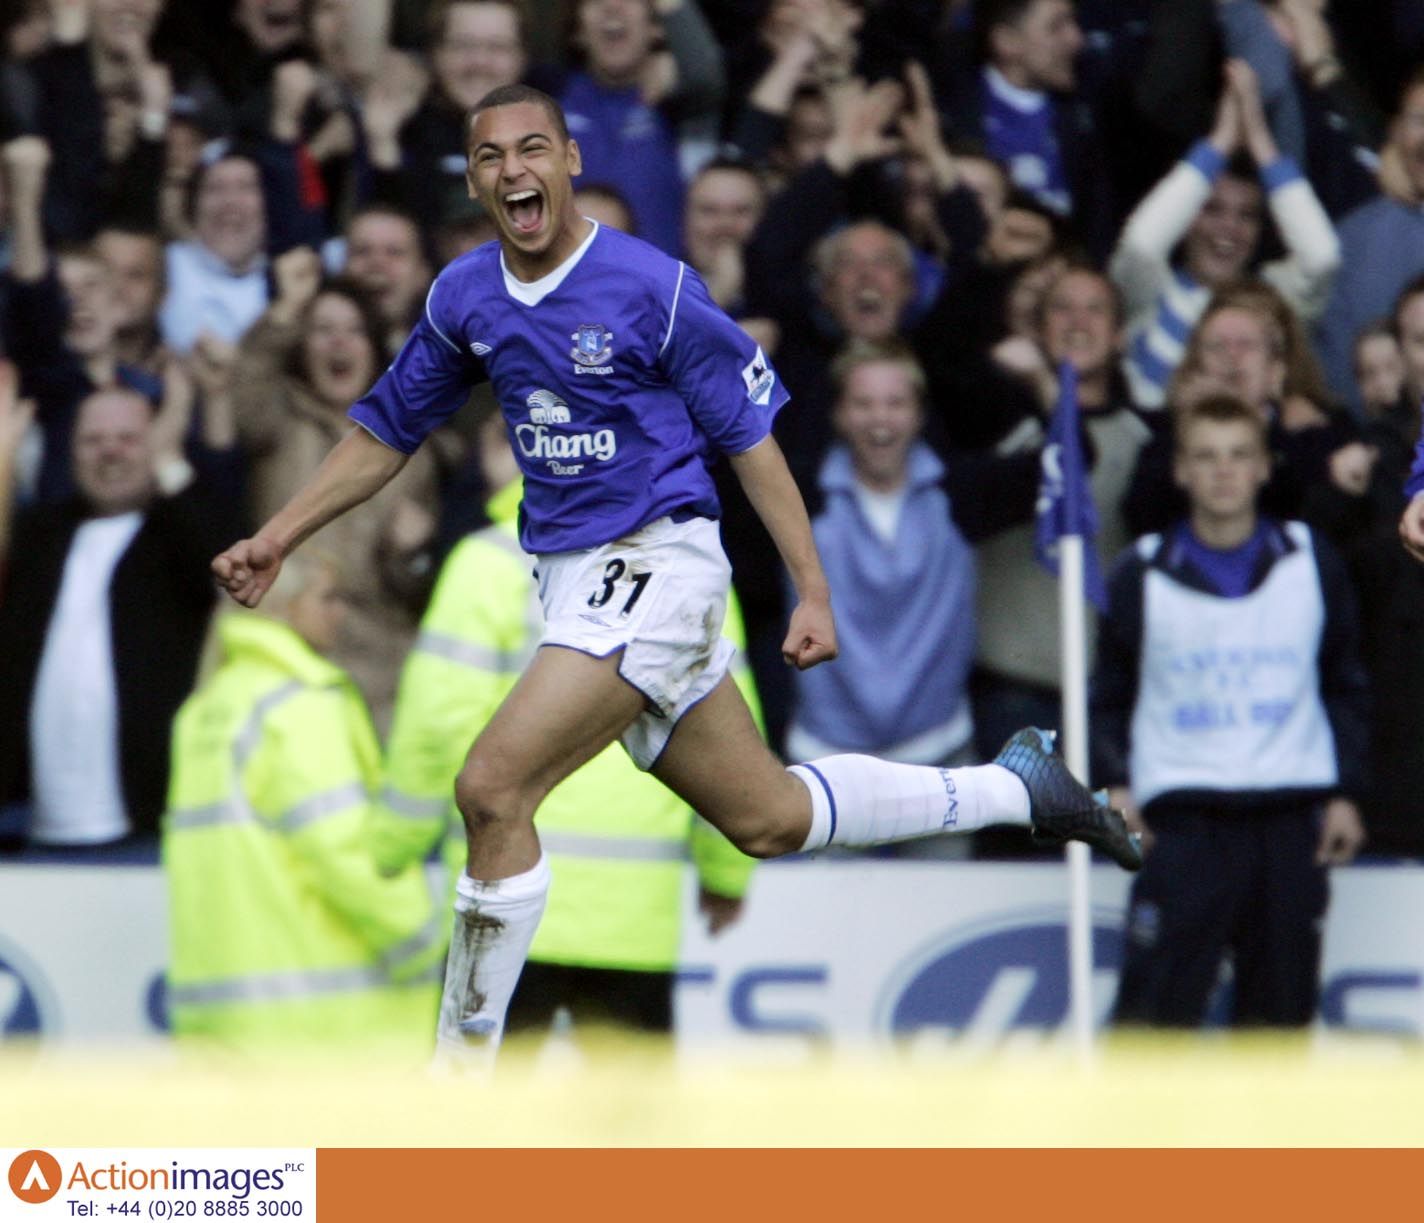 Football - Everton v Crystal Palace FA Barclays Premiership  - Goodison Park - 10/4/05 
James Vaughan celebrates after scoring the fourth goal for Everton 
Mandatory Credit: Action Images / Darren Walsh 
Livepic 
NO ONLINE/INTERNET USE WITHOUT A LICENCE FROM THE FOOTBALL DATA CO LTD. FOR LICENCE ENQUIRIES PLEASE TELEPHONE +44 207 298 1656.